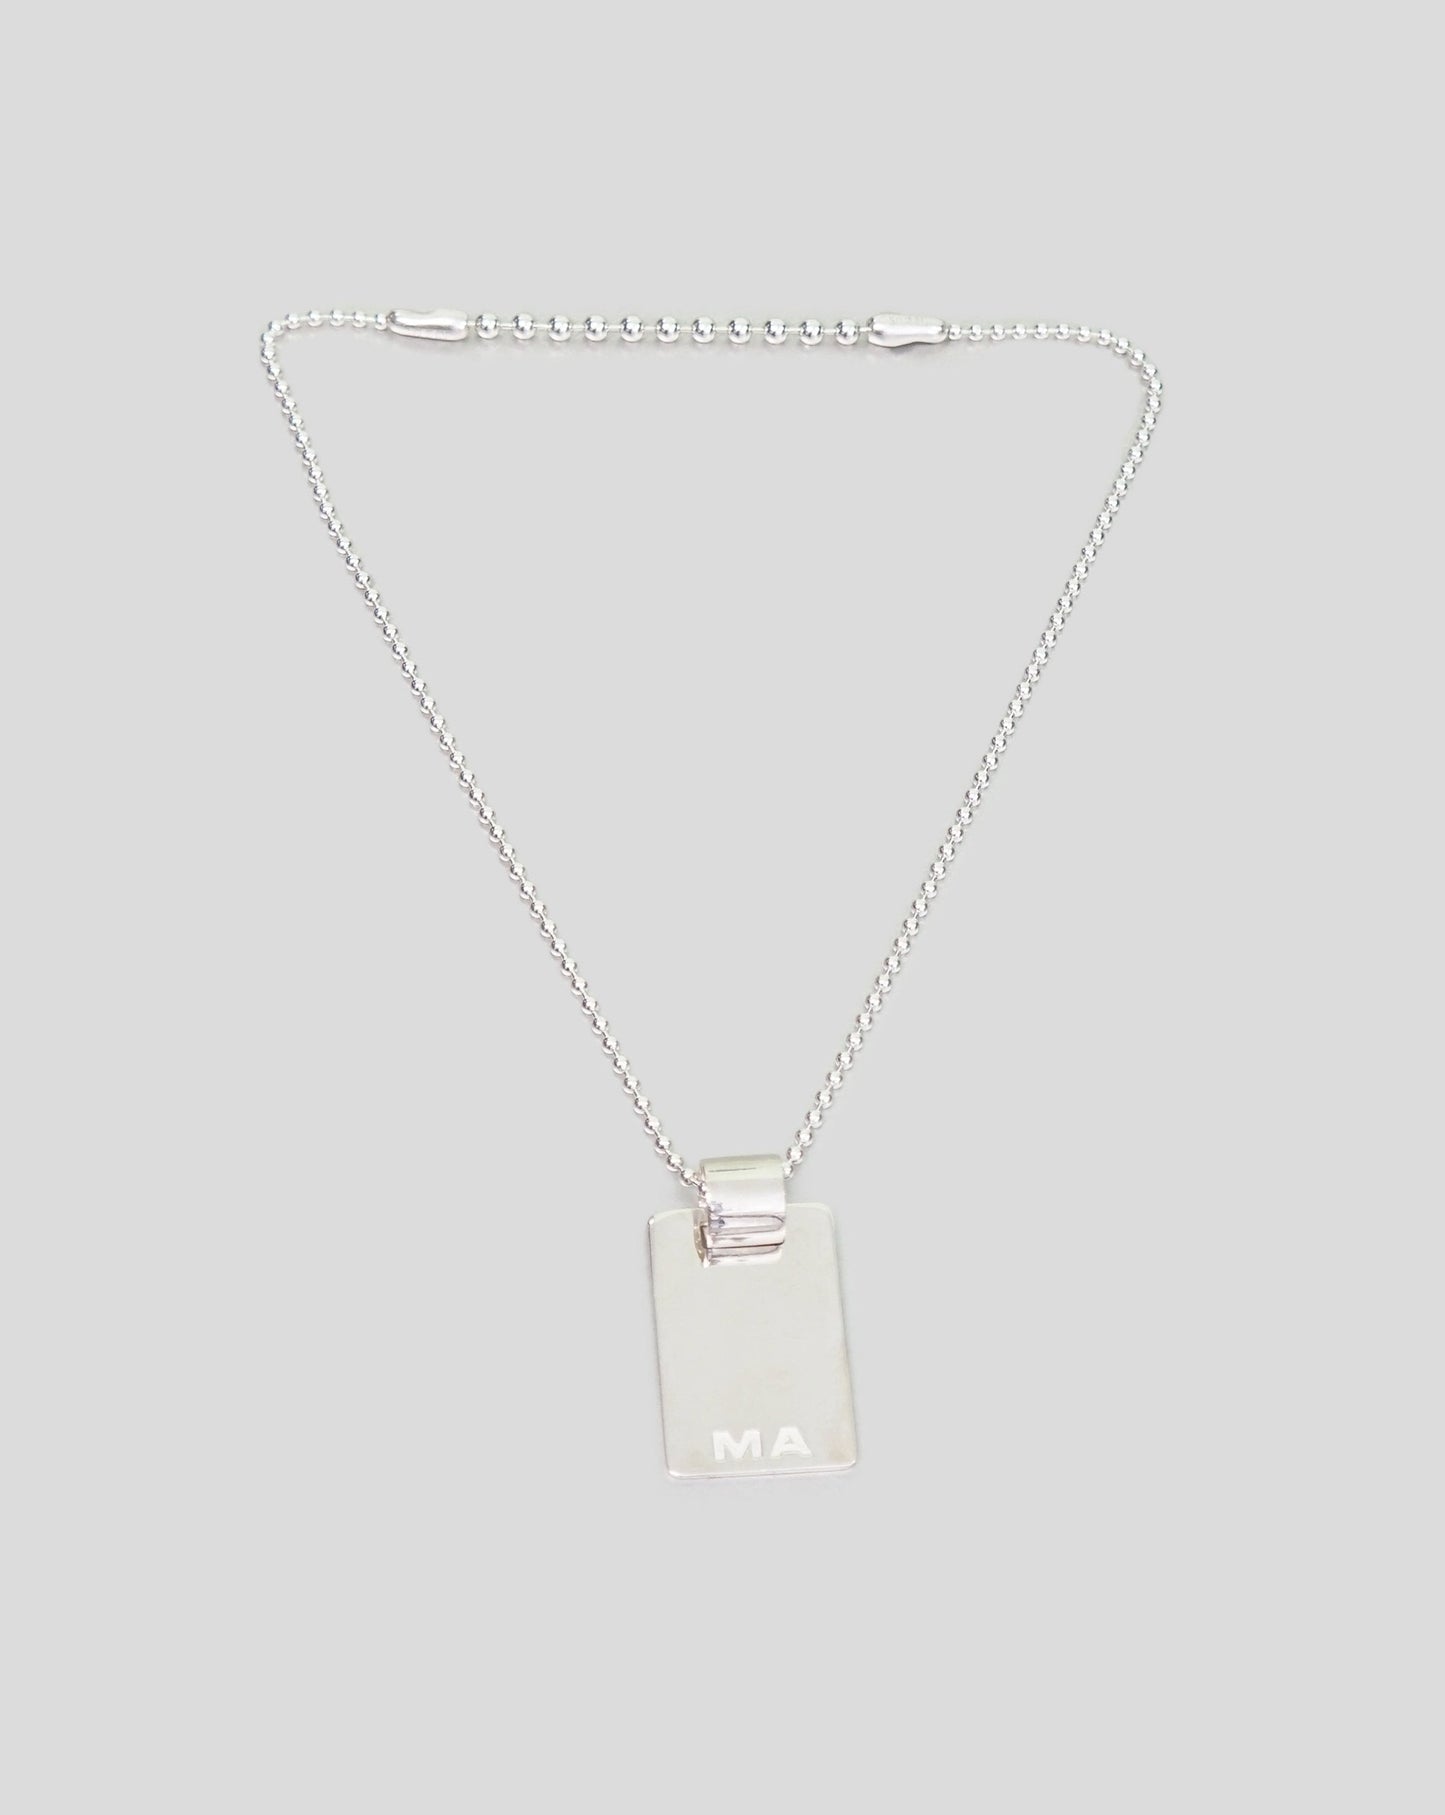 MARTINE ALI - PHAT TAG NECKLACE